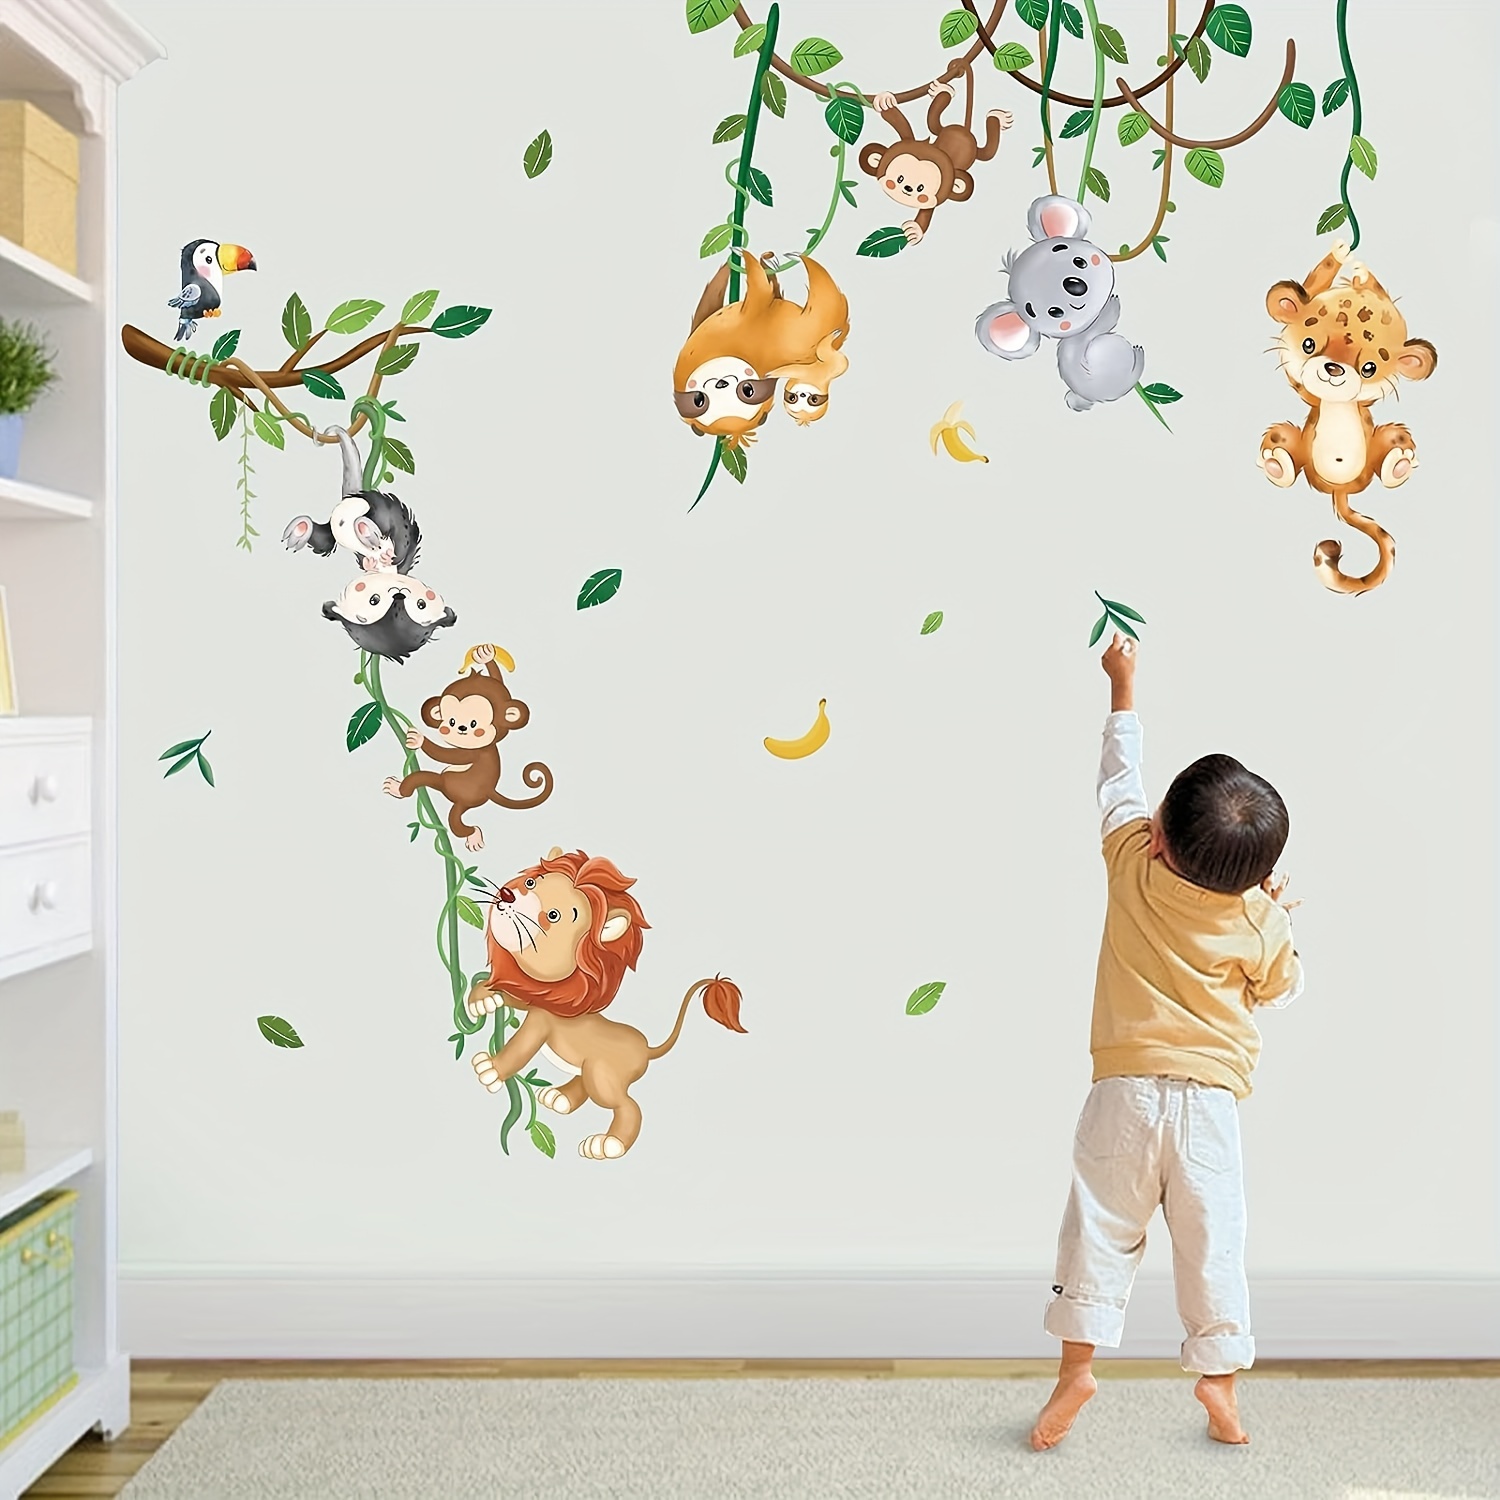 

Jungle Animals Climbing Tree Wall Decals, Monkey Lion Koala Tiger Wall Stickers, Room Living Room Home Decor Easter Gift